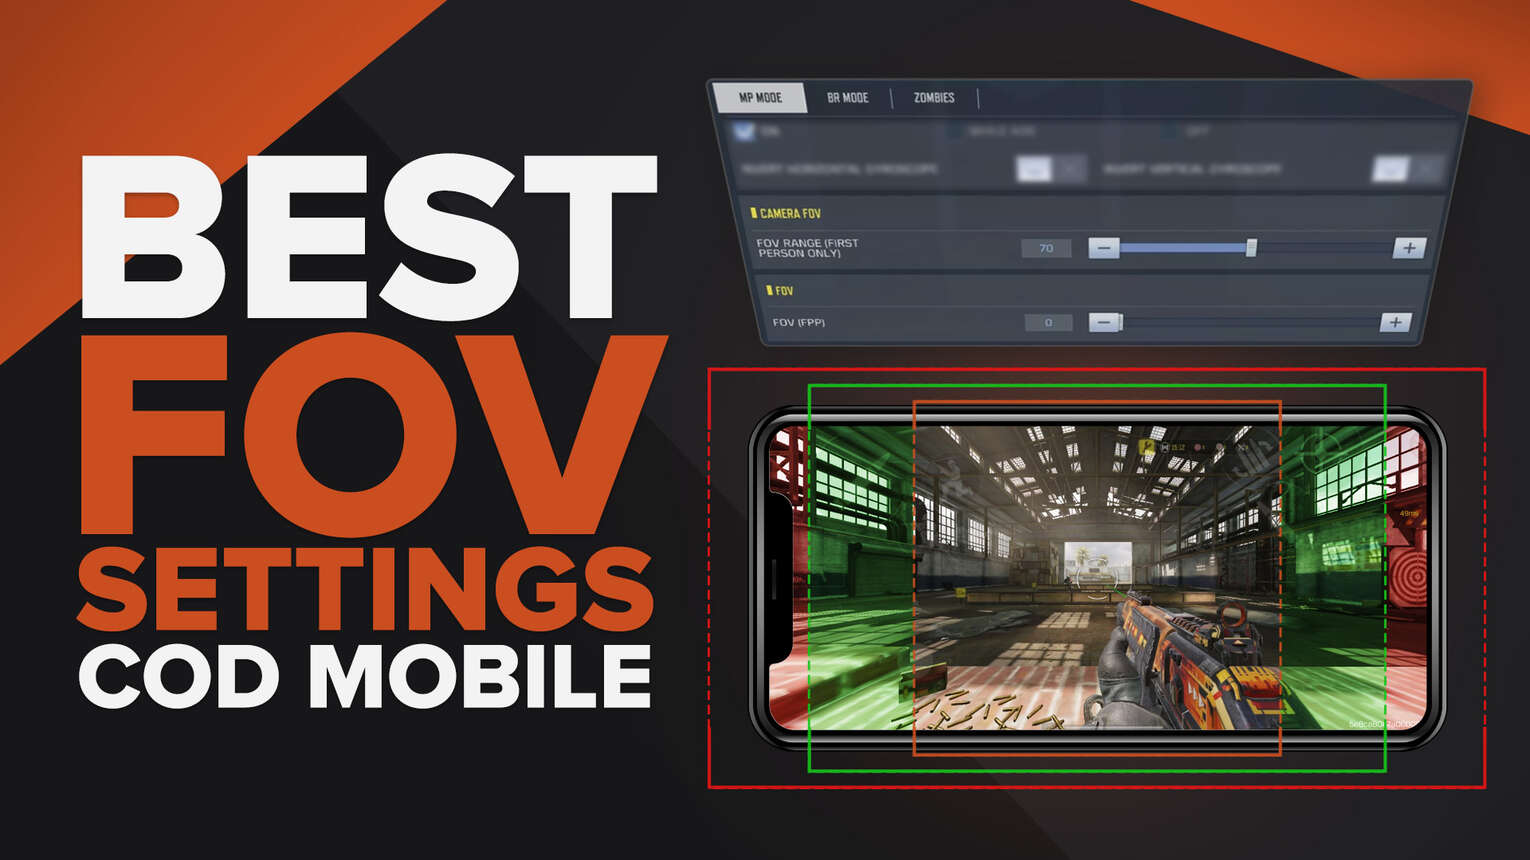 BEST Sniper Settings in Call of Duty Mobile (NO LAG)